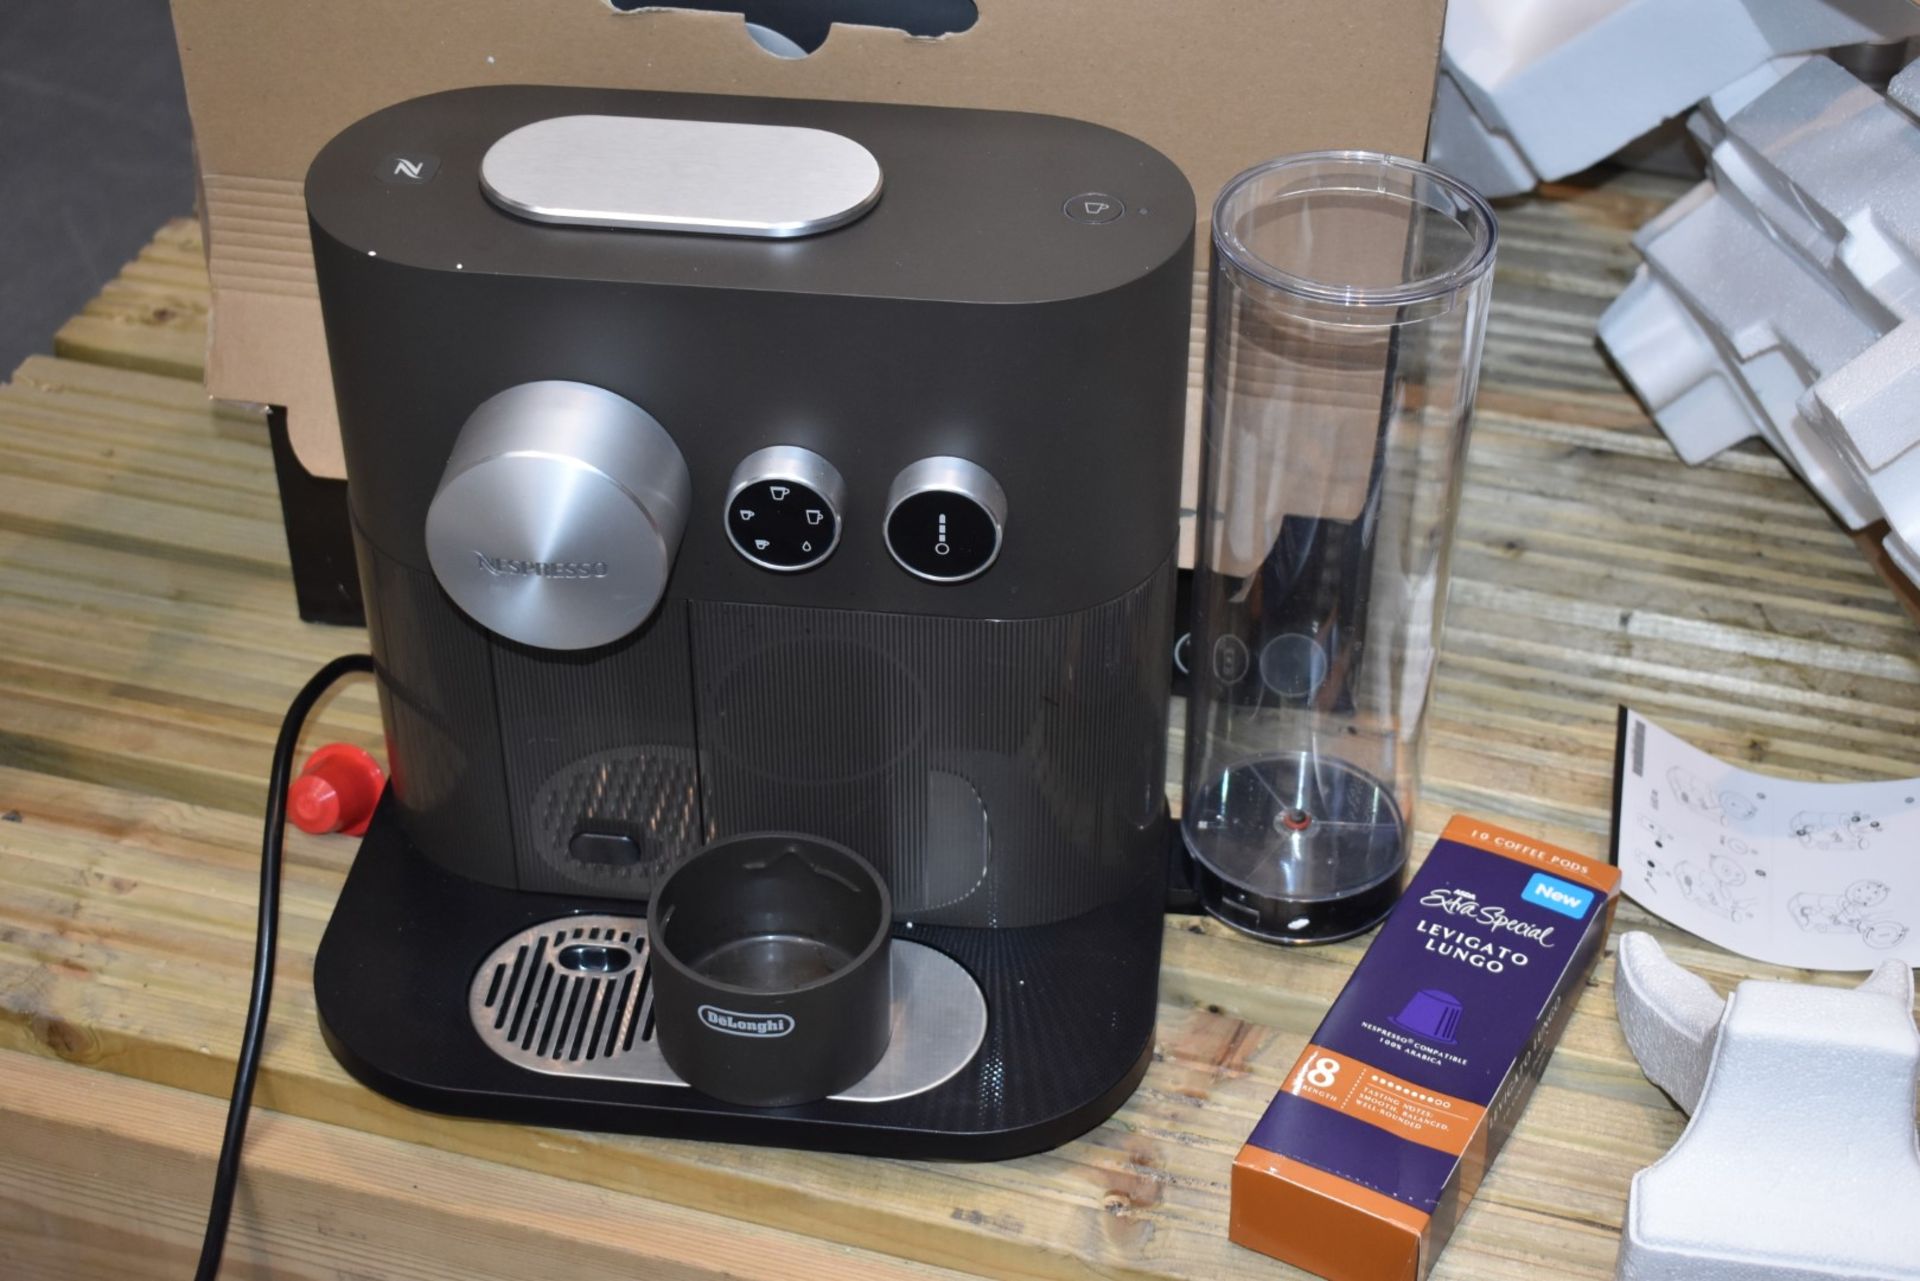 1 x DeLonghi EN350.G Nespresso Coffee Capsule Machine - Used Once - With Original Box and - Image 6 of 8